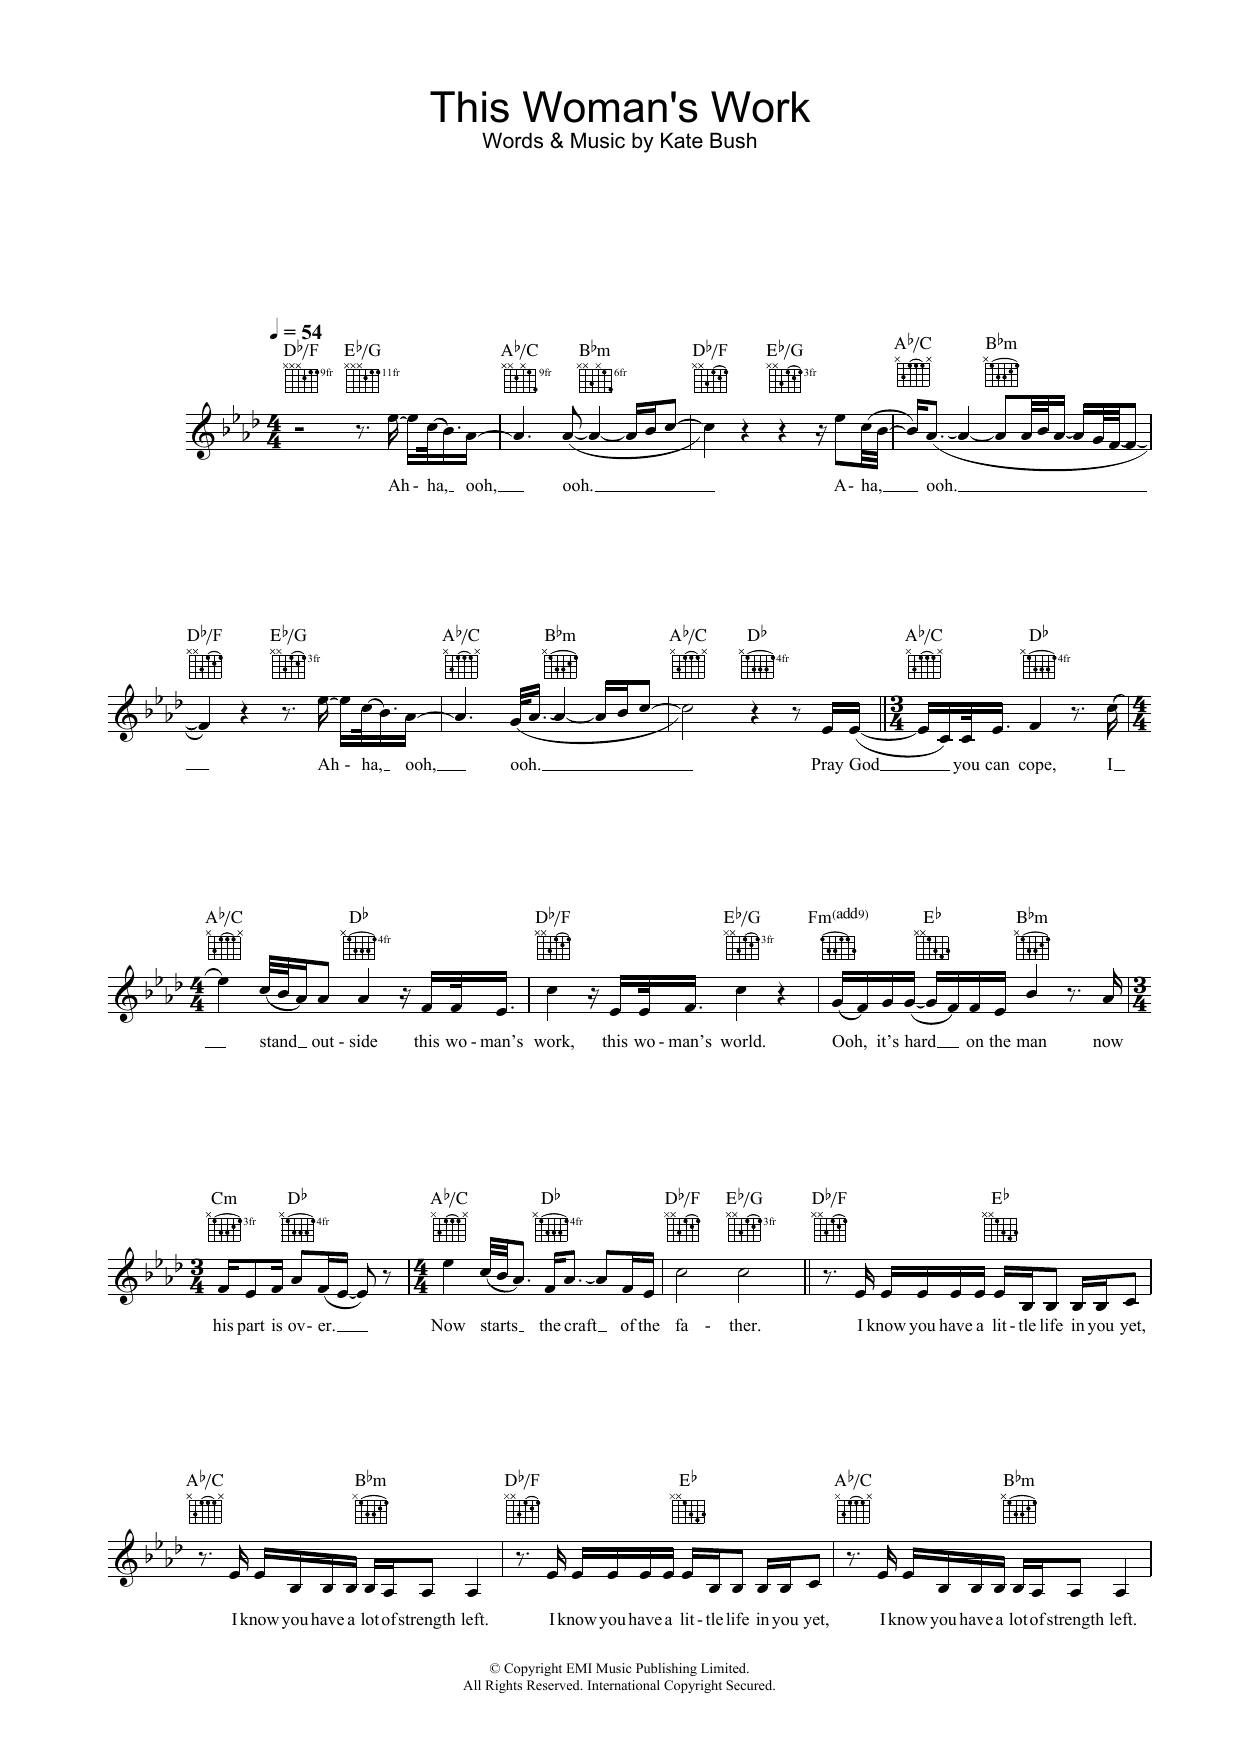 Download Kate Bush This Woman's Work (from She's Having A Sheet Music